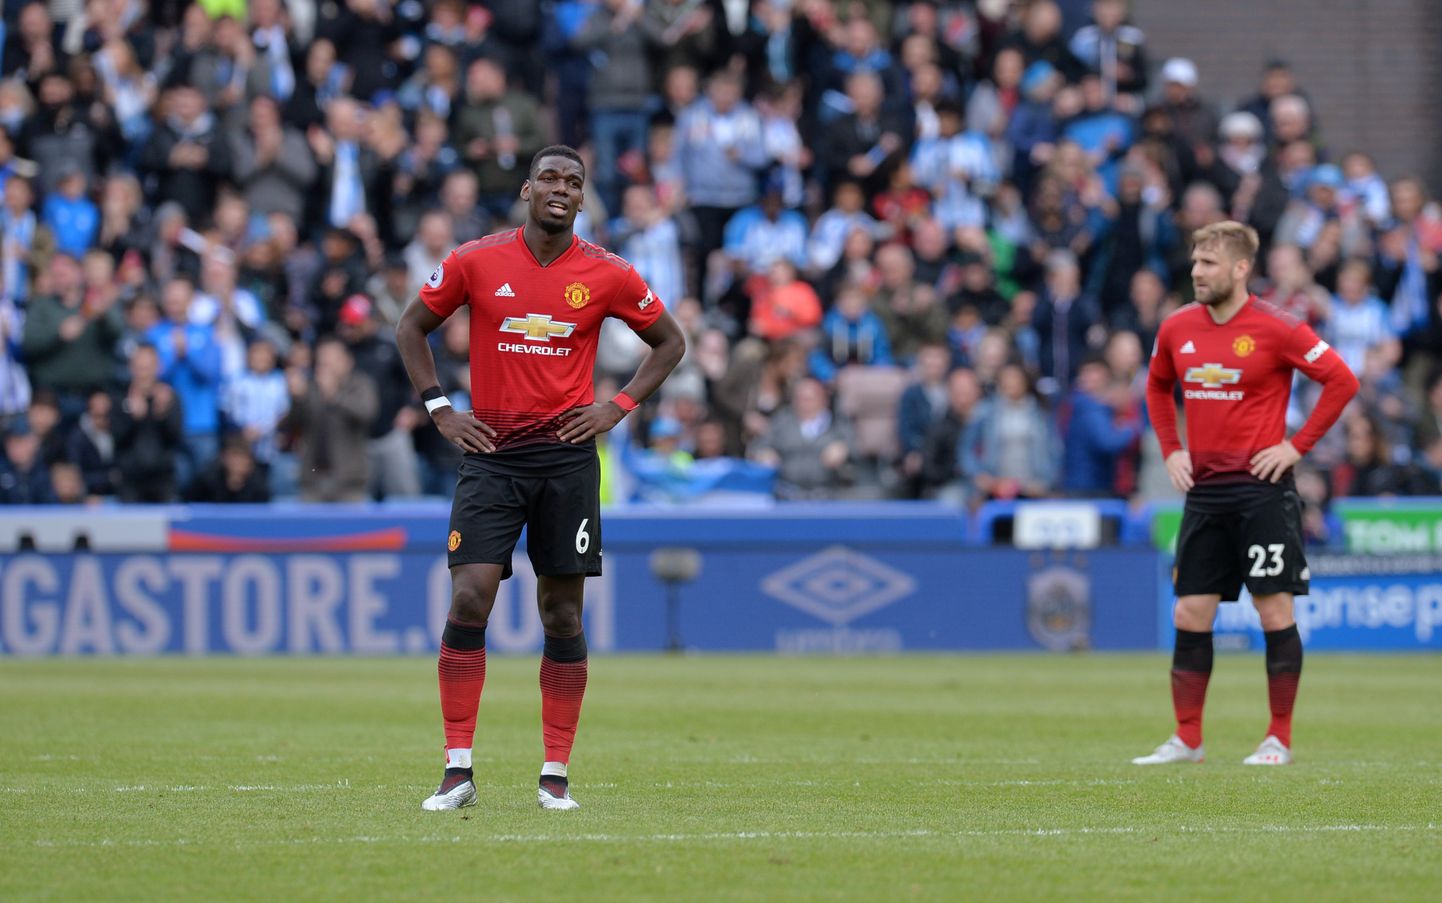 Soccer Football - Premier League - Huddersfield Town v Manchester United - John Smith's Stadium, Huddersfield, Britain - May 5, 2019  Manchester United's Paul Pogba and Luke Shaw look dejected during the match       REUTERS/Peter Powell  EDITORIAL USE ONLY. No use with unauthorized audio, video, data, fixture lists, club/league logos or "live" services. Online in-match use limited to 75 images, no video emulation. No use in betting, games or single club/league/player publications.  Please contact your account representative for further details.